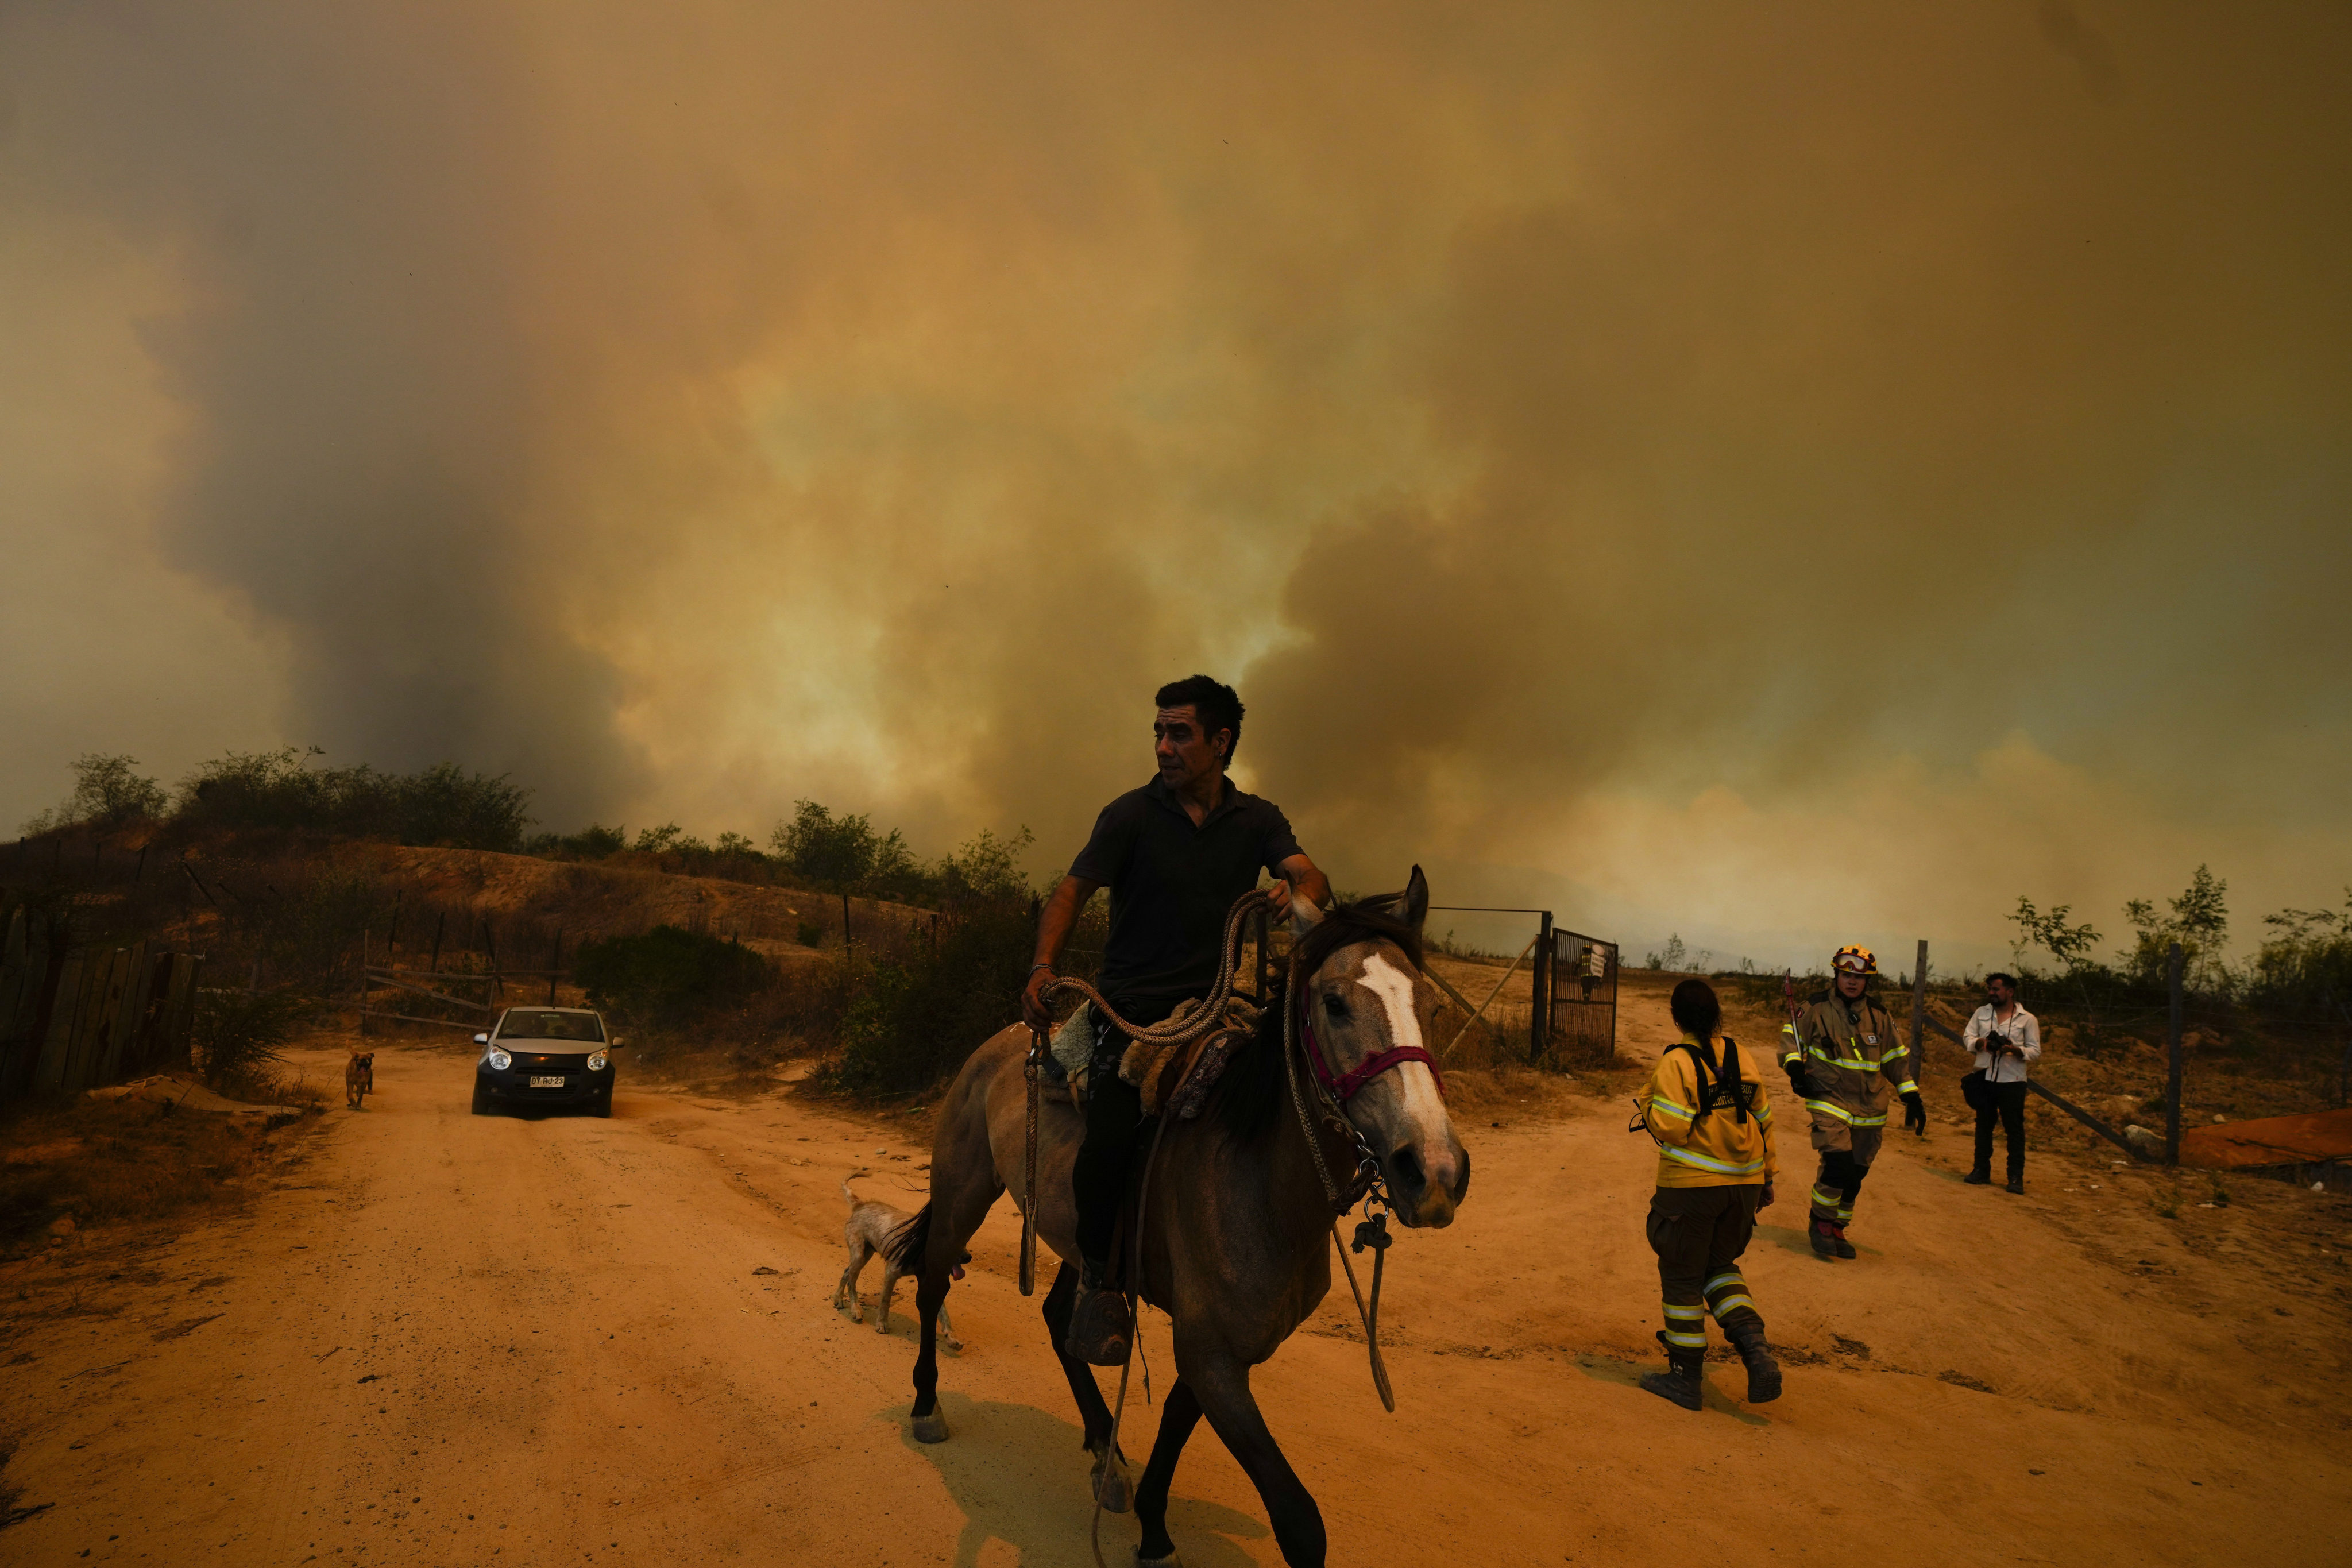 A resident flees an encroaching forest fire in Vina del Mar, Chile on Saturday. Photo: AP